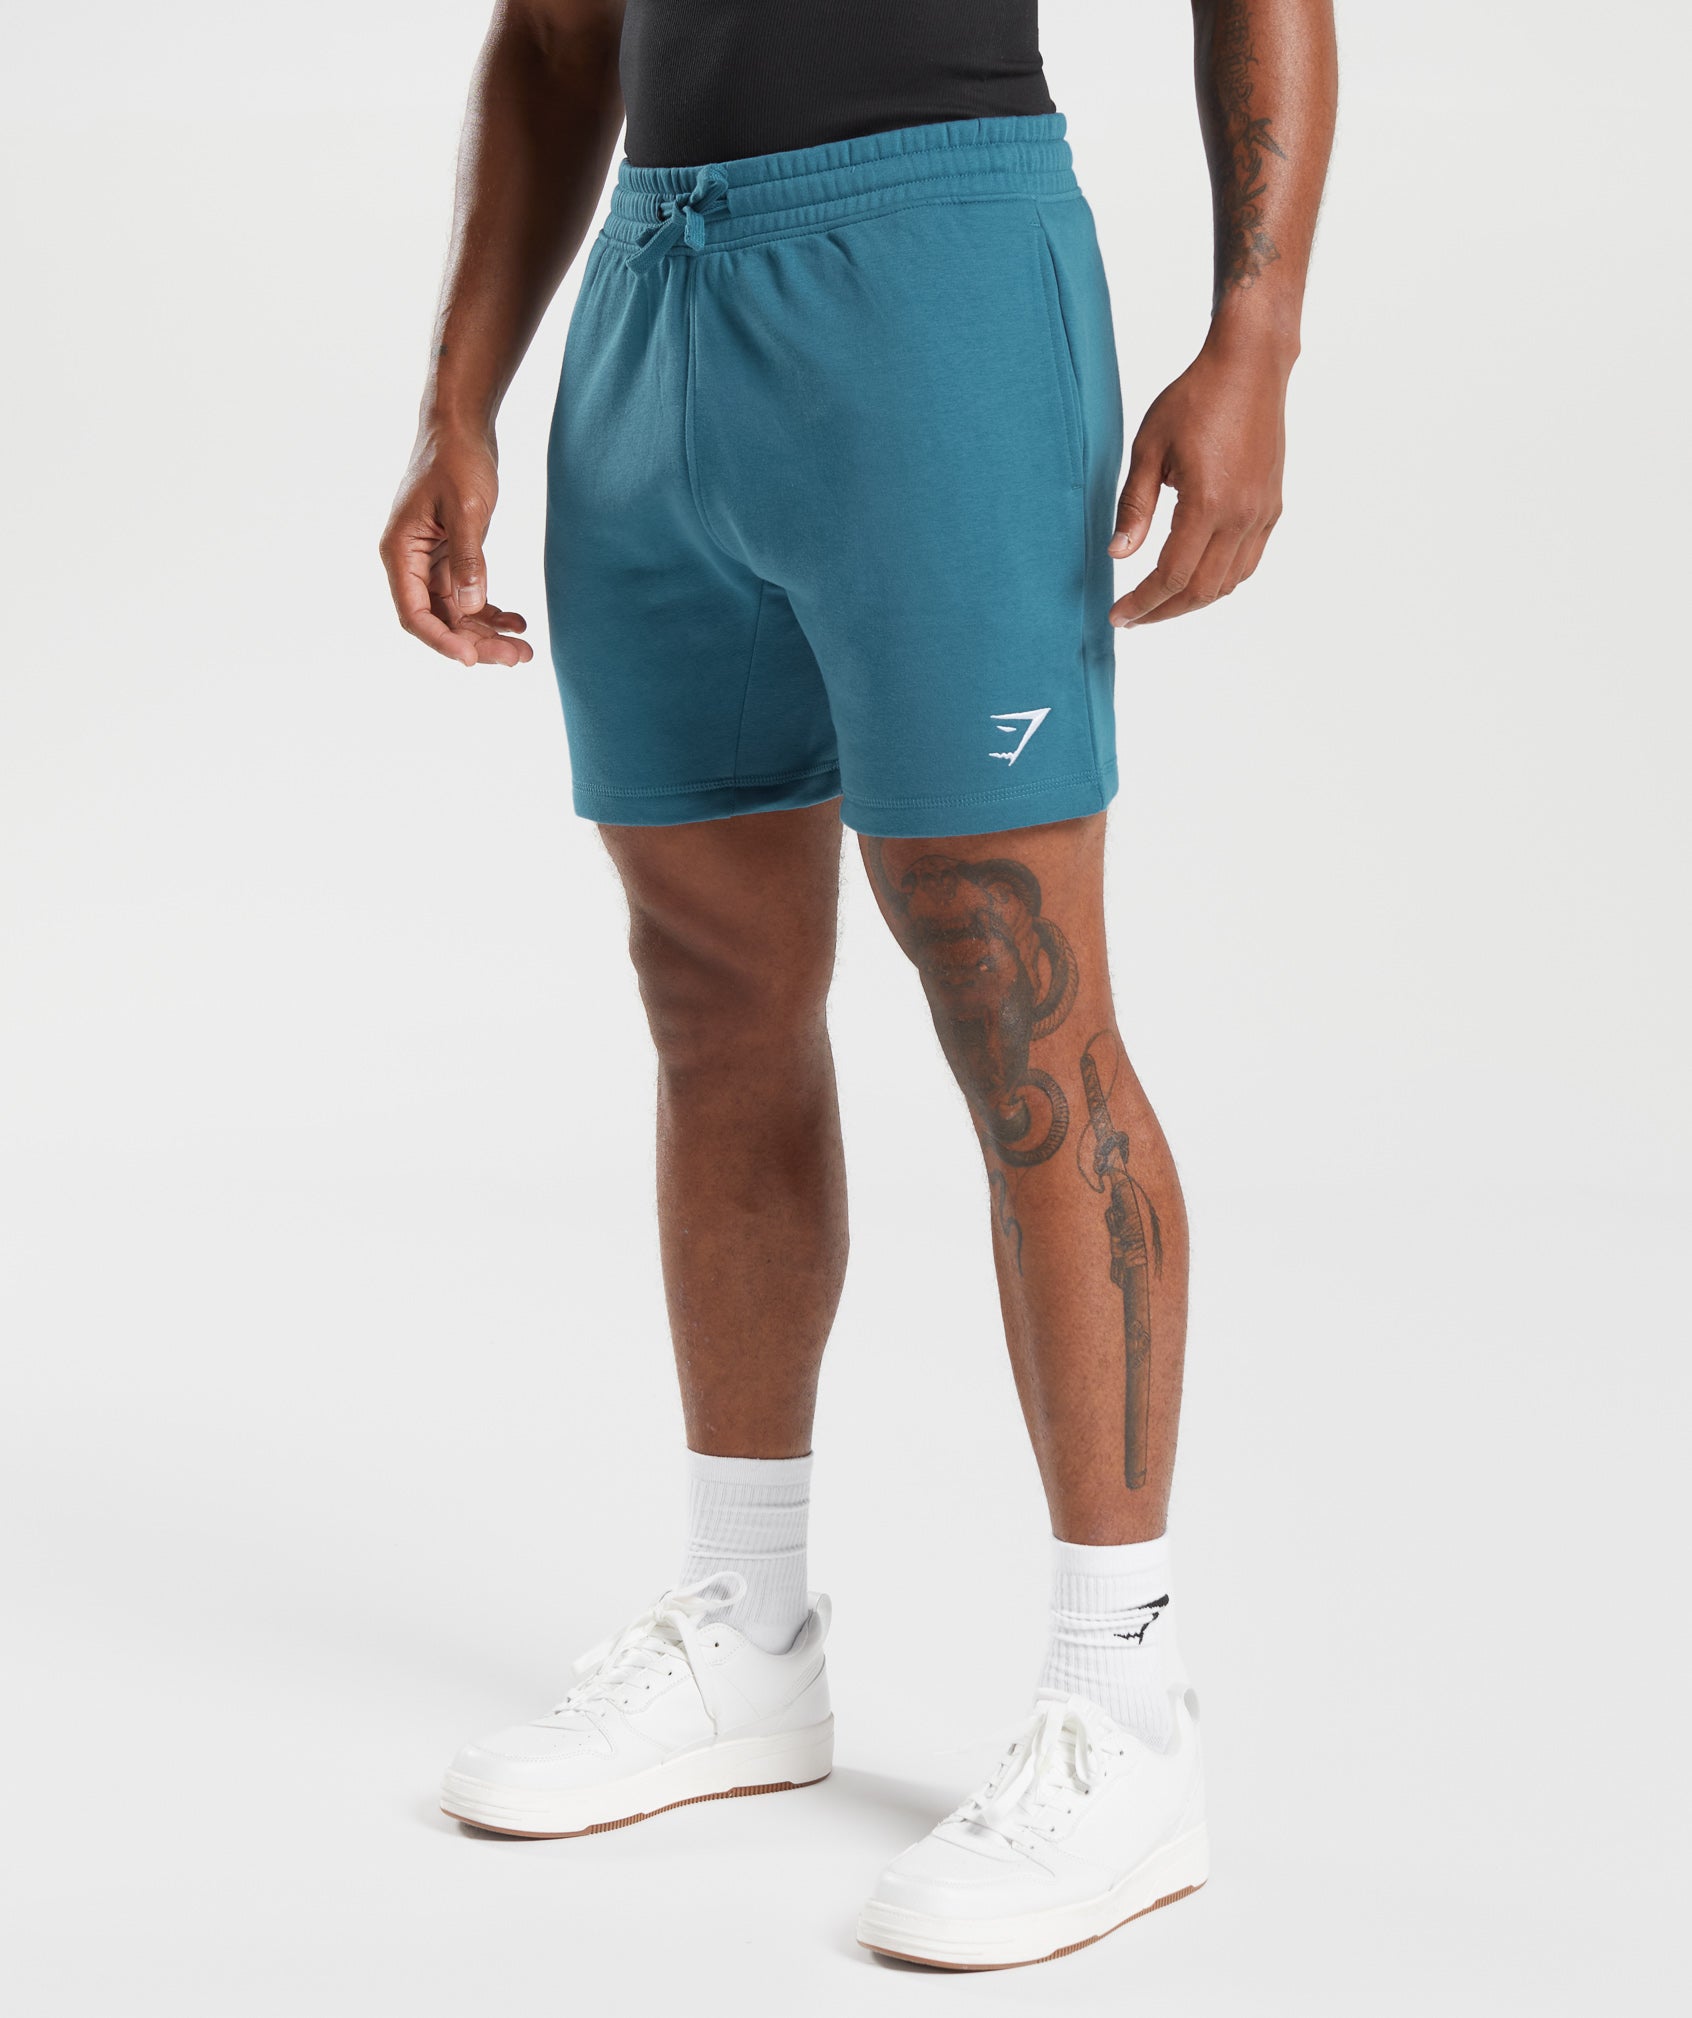 Crest 7" Shorts in Terrace Blue - view 3